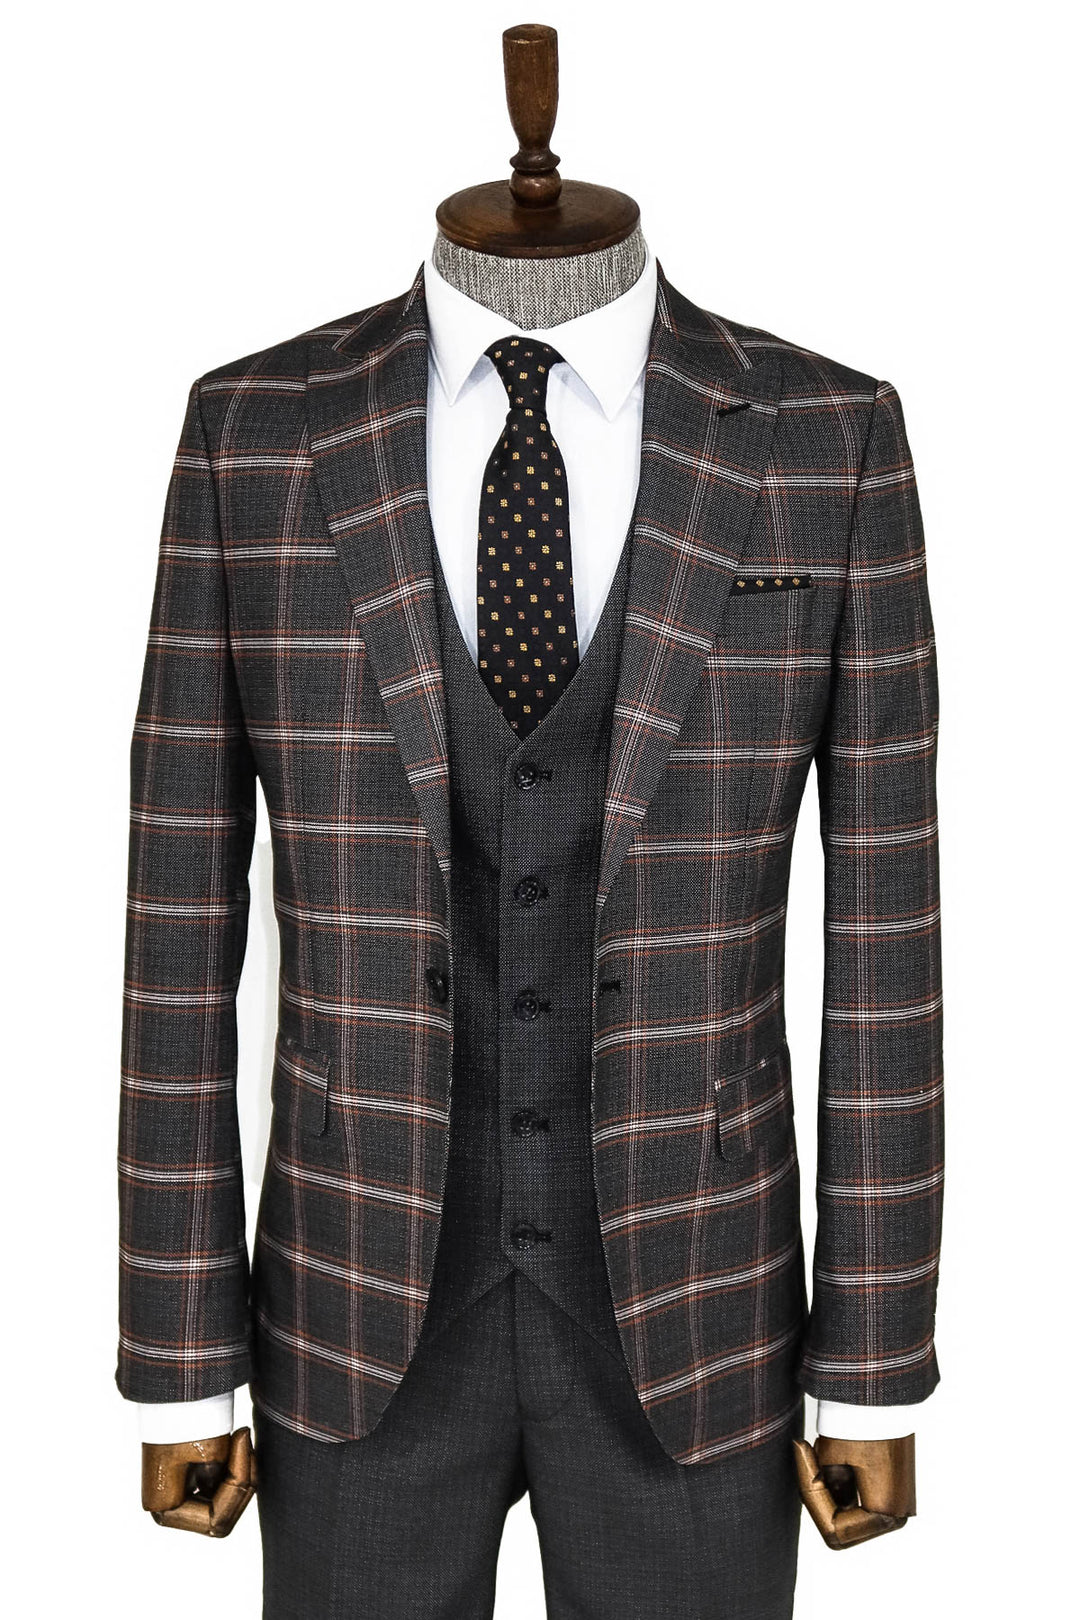 Checked Patterned Black Slim Fit Suit - Wessi